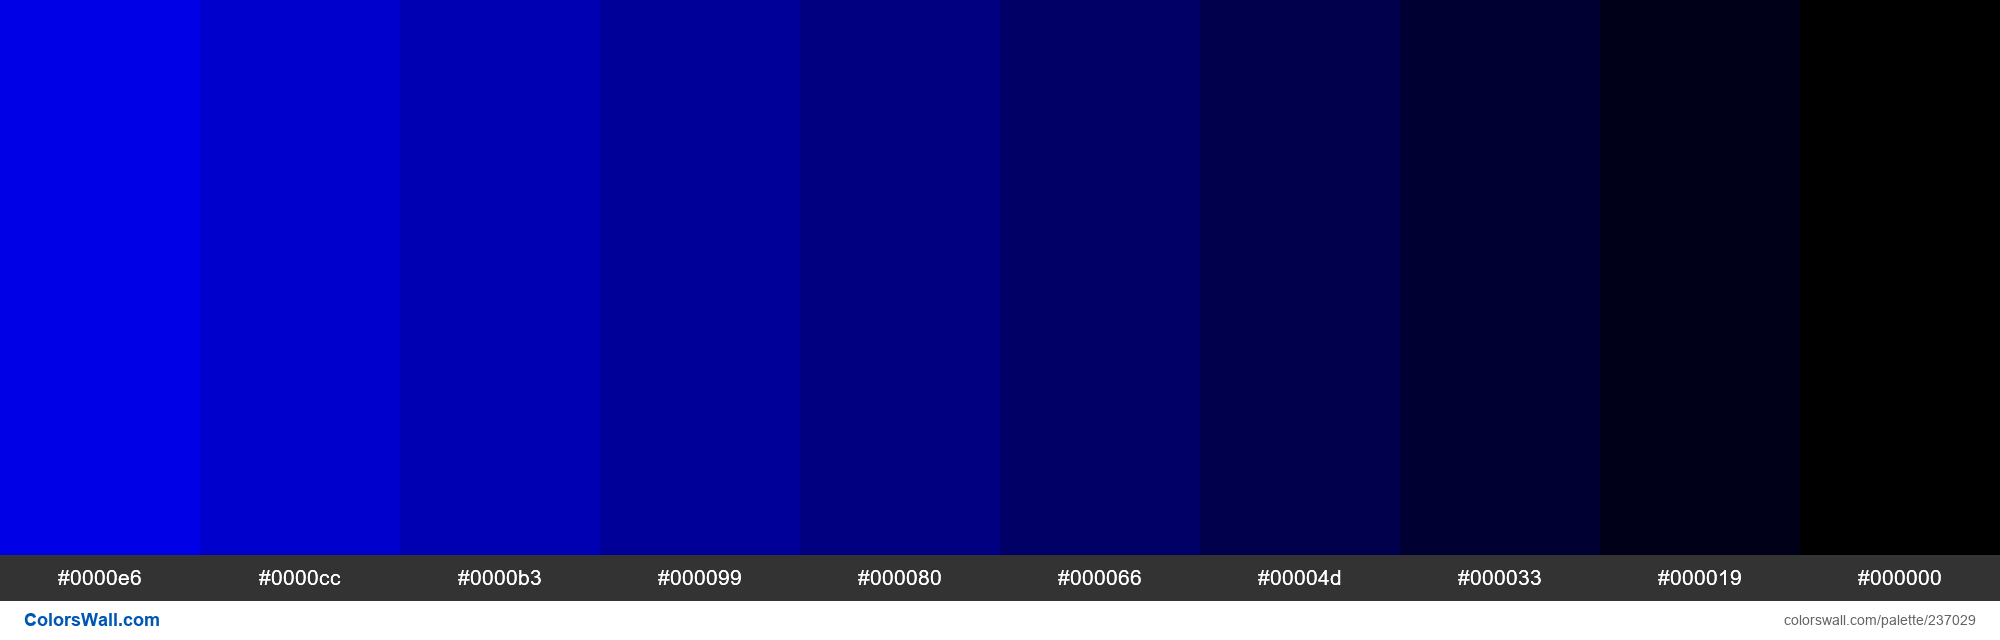 10 Shades of Blue colors palette - ColorsWall